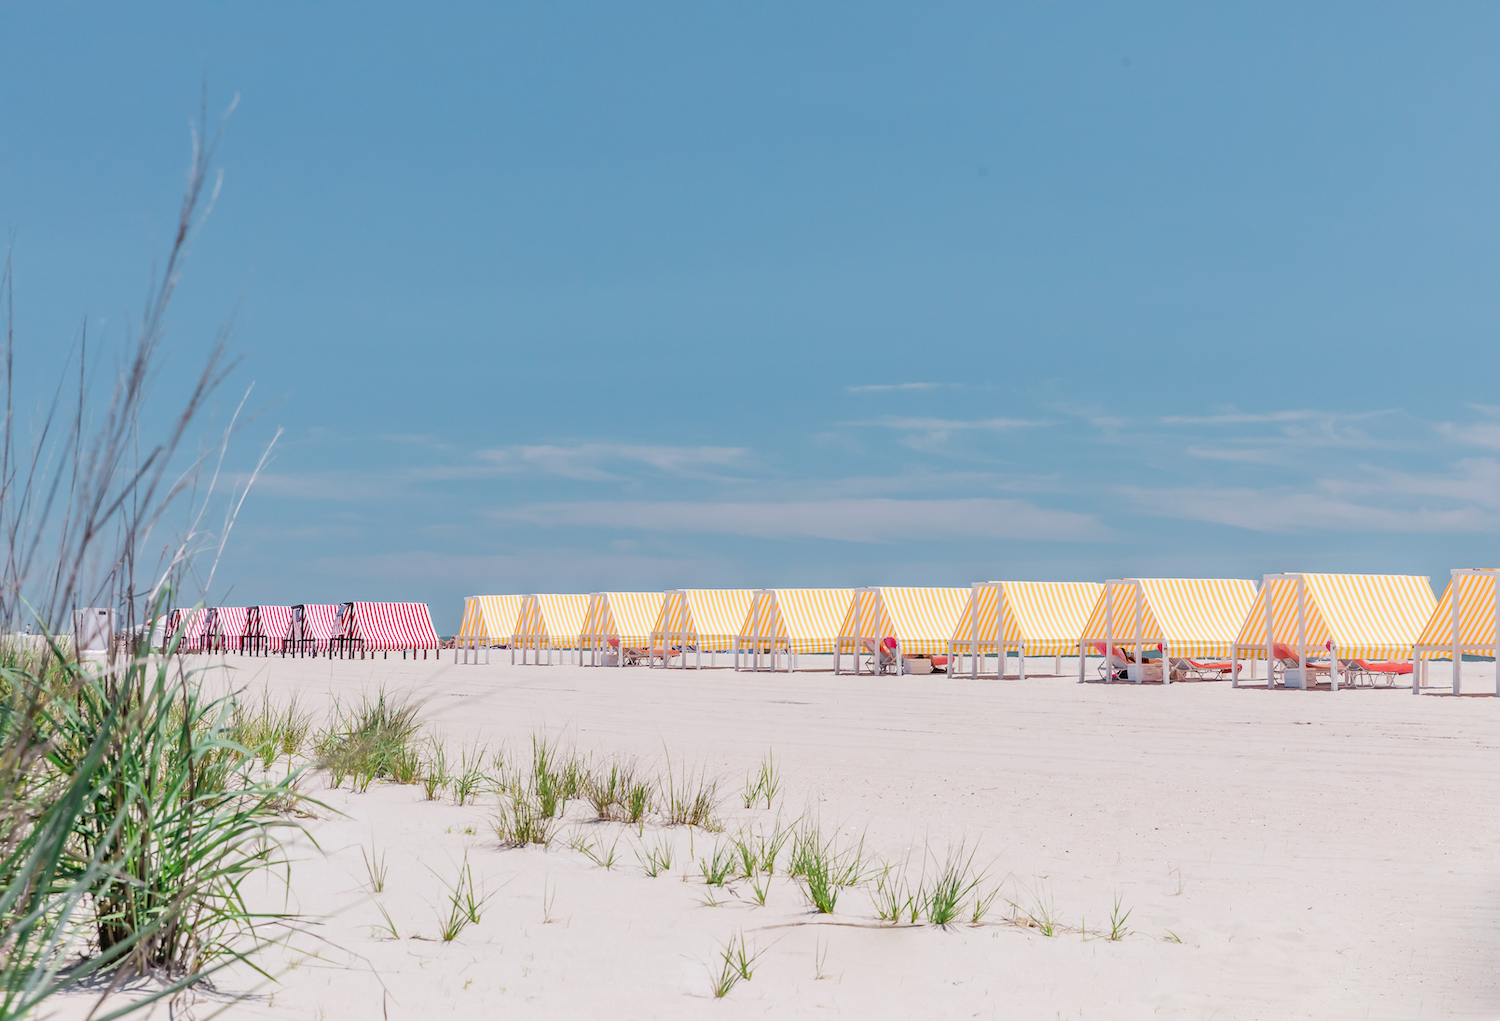 Red and Yellow Cabanas on the beach in Cape May New Jersey